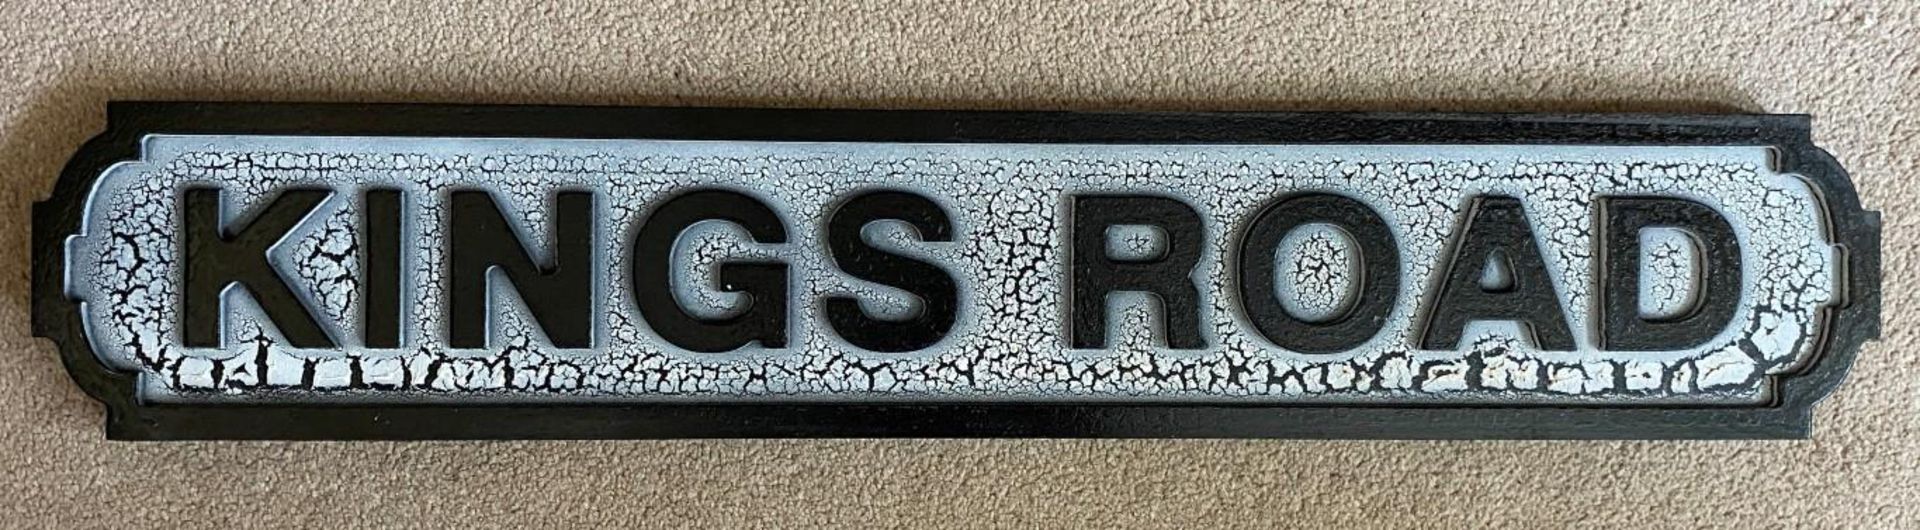 A LARGE KINGS ROAD WOODEN STREET SIGN, LENGTH 80 CM